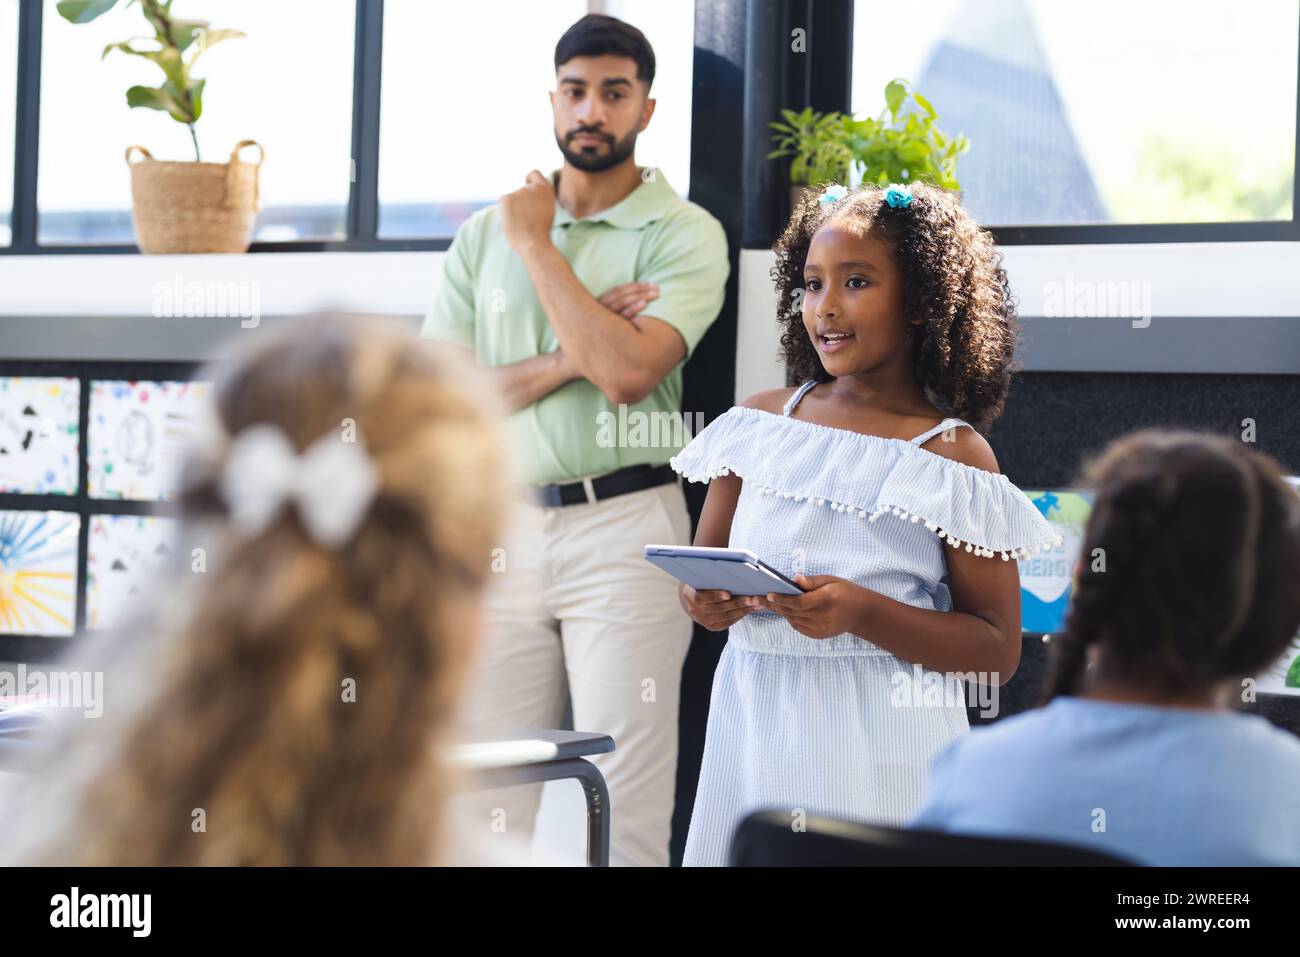 Young Asian male teacher stands observing a biracial girl presenting to the class in school Stock Photo